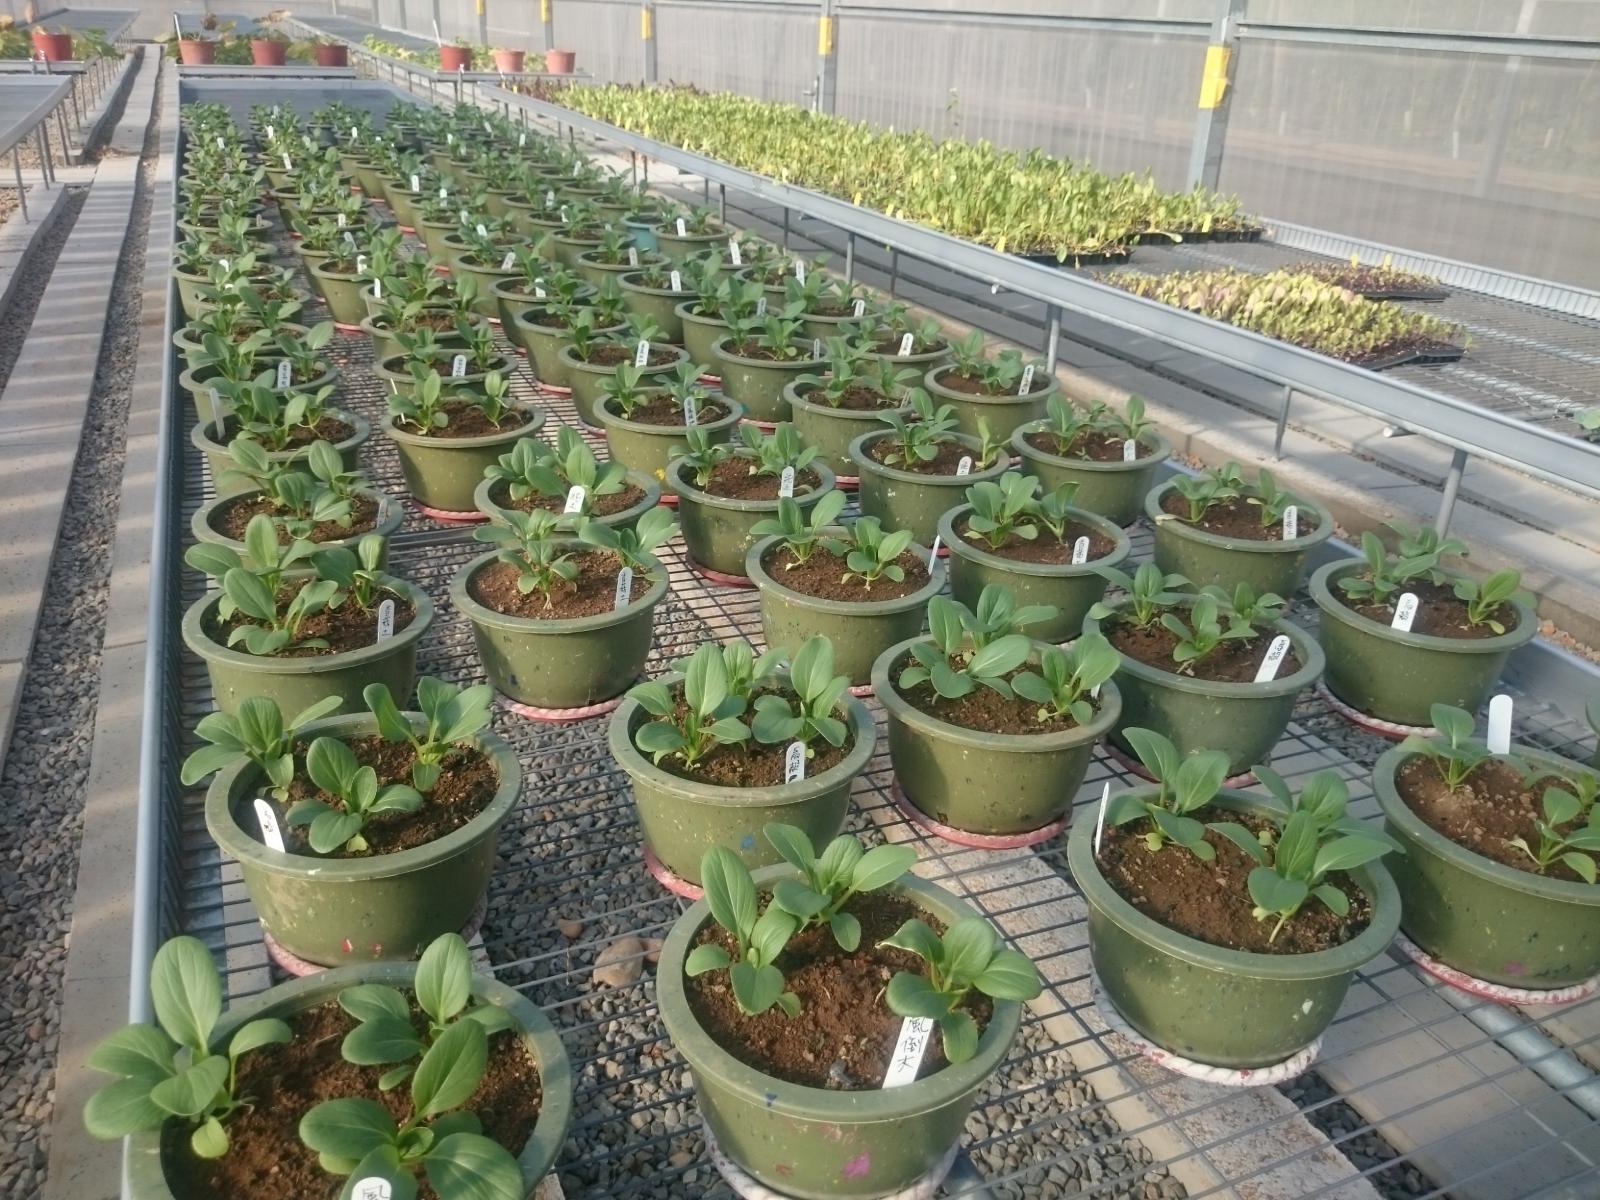 The cultivation experiment of Chinese cabbage in pots was carried out by mixing soil with different sources of biochar materials.